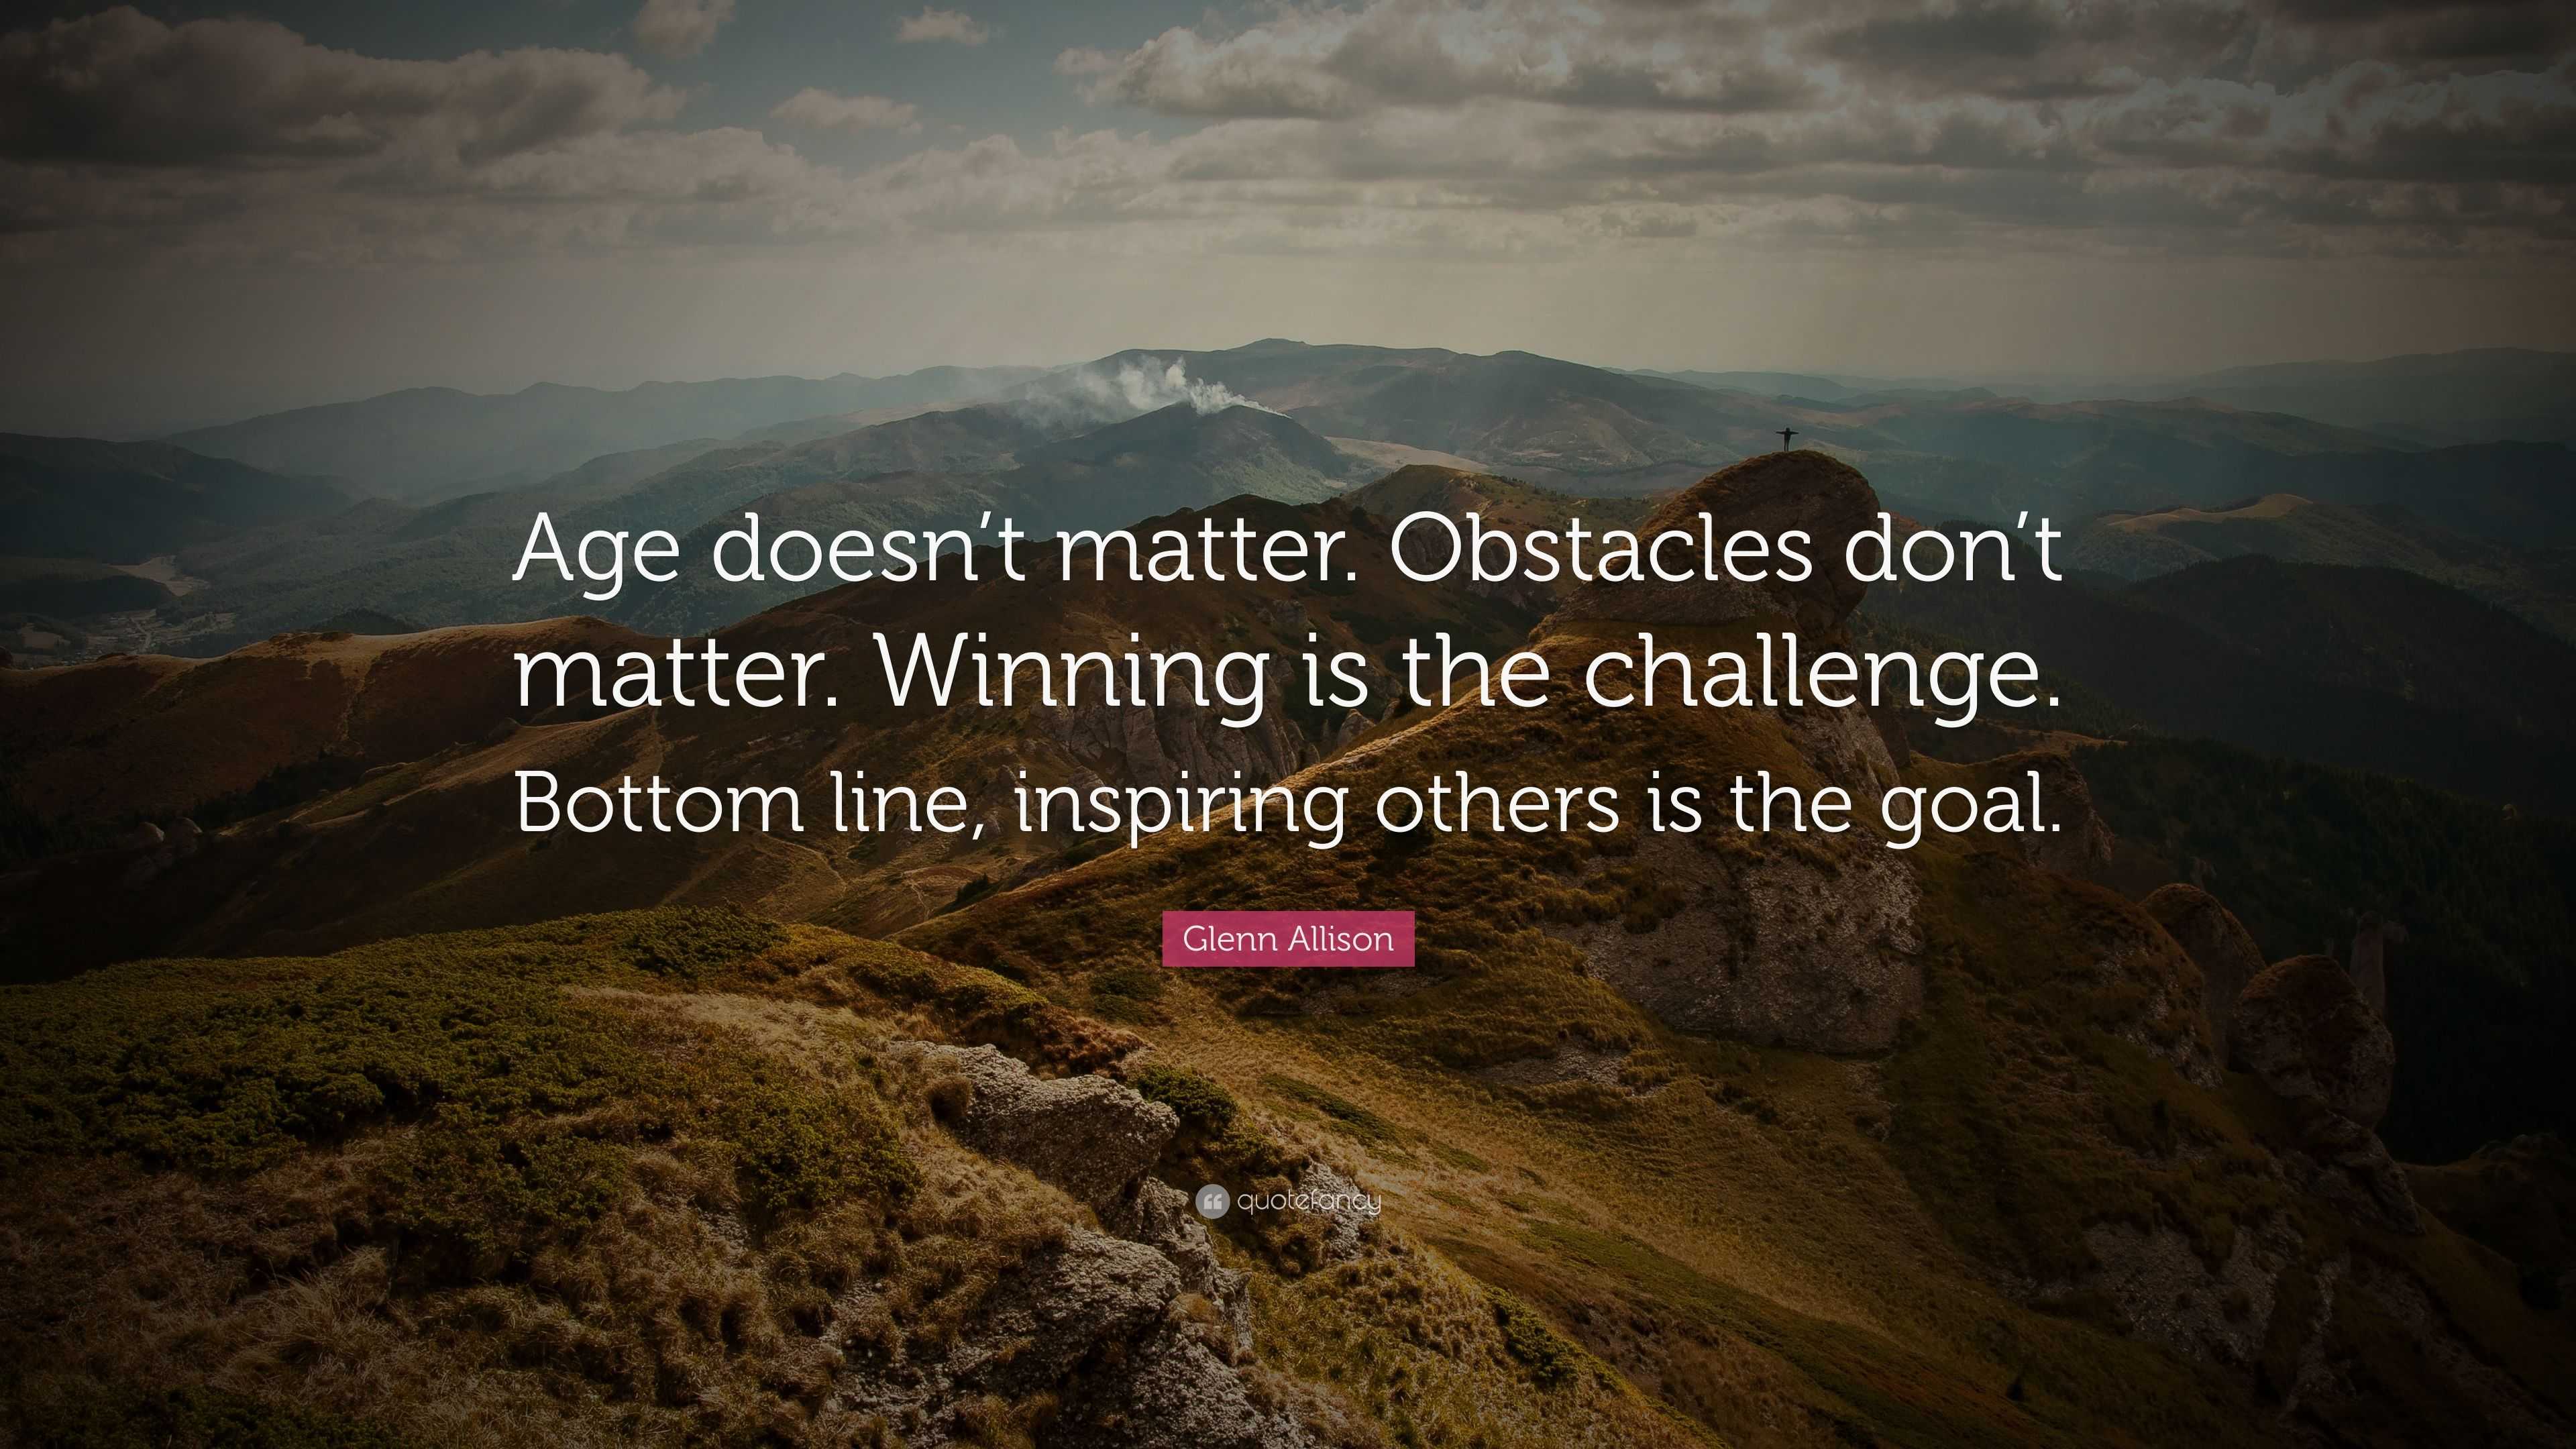 Glenn Allison Quote: “Age doesn't matter. Obstacles don't matter